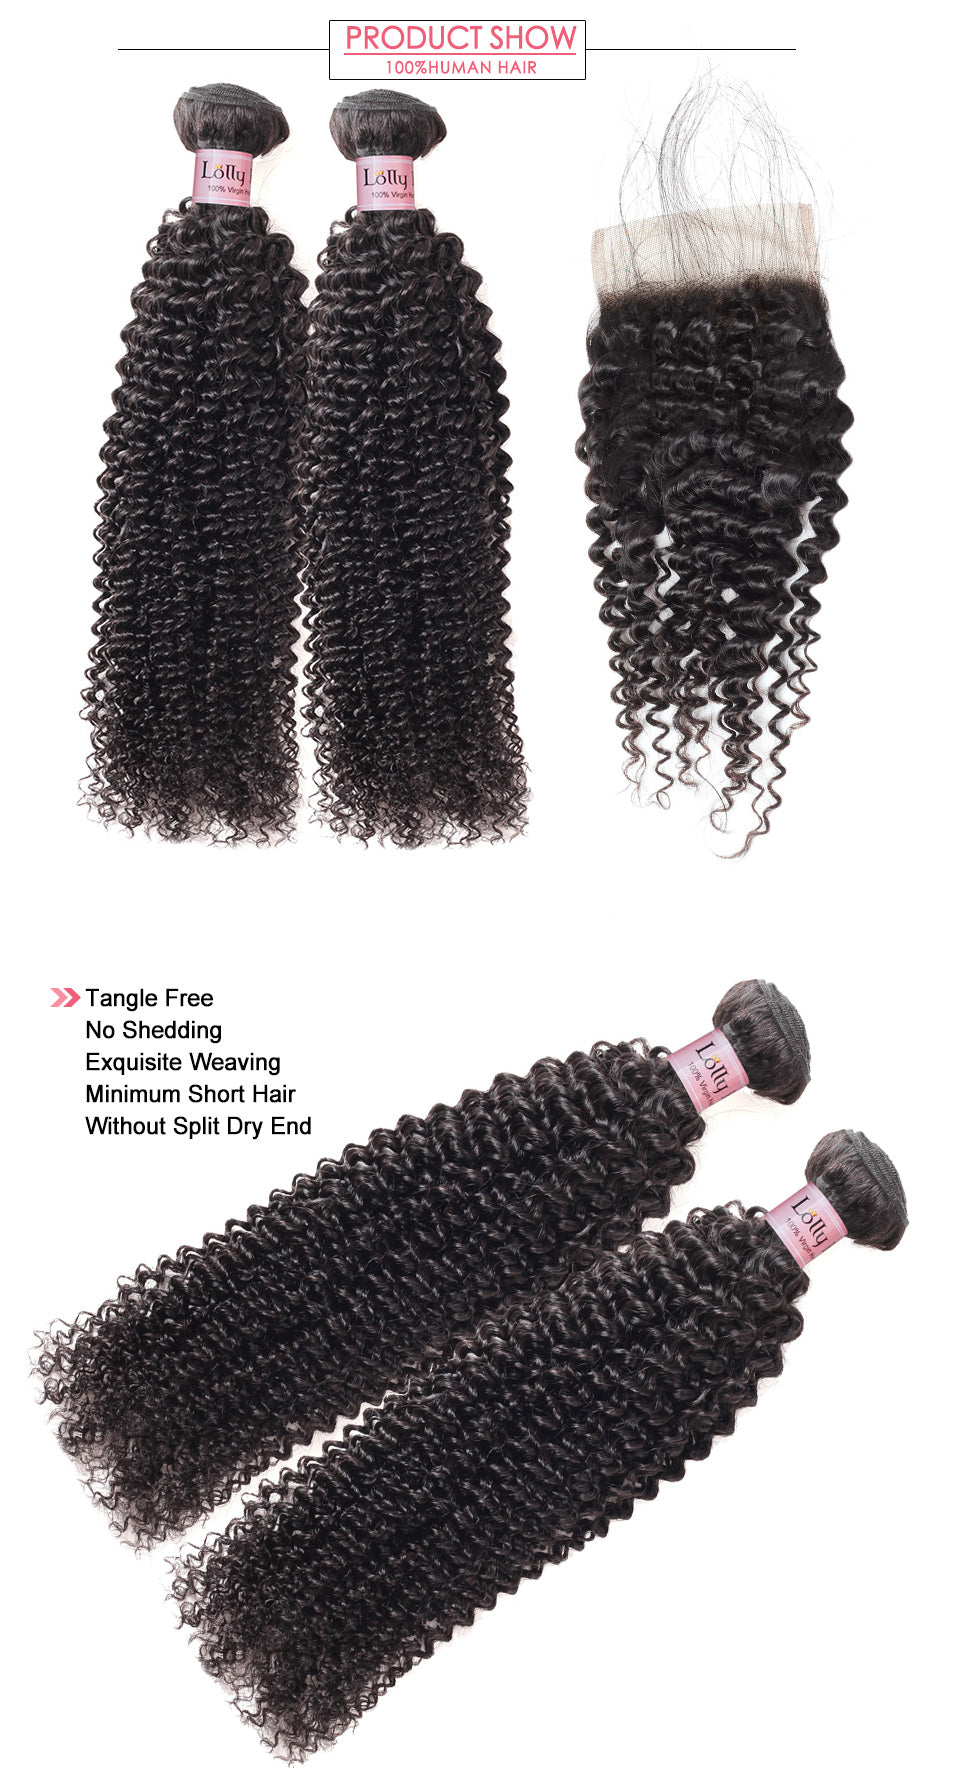 LOLLY Virgin Peruvian Kinky Curly Hair 2 Bundles with 4x4 Lace Closure